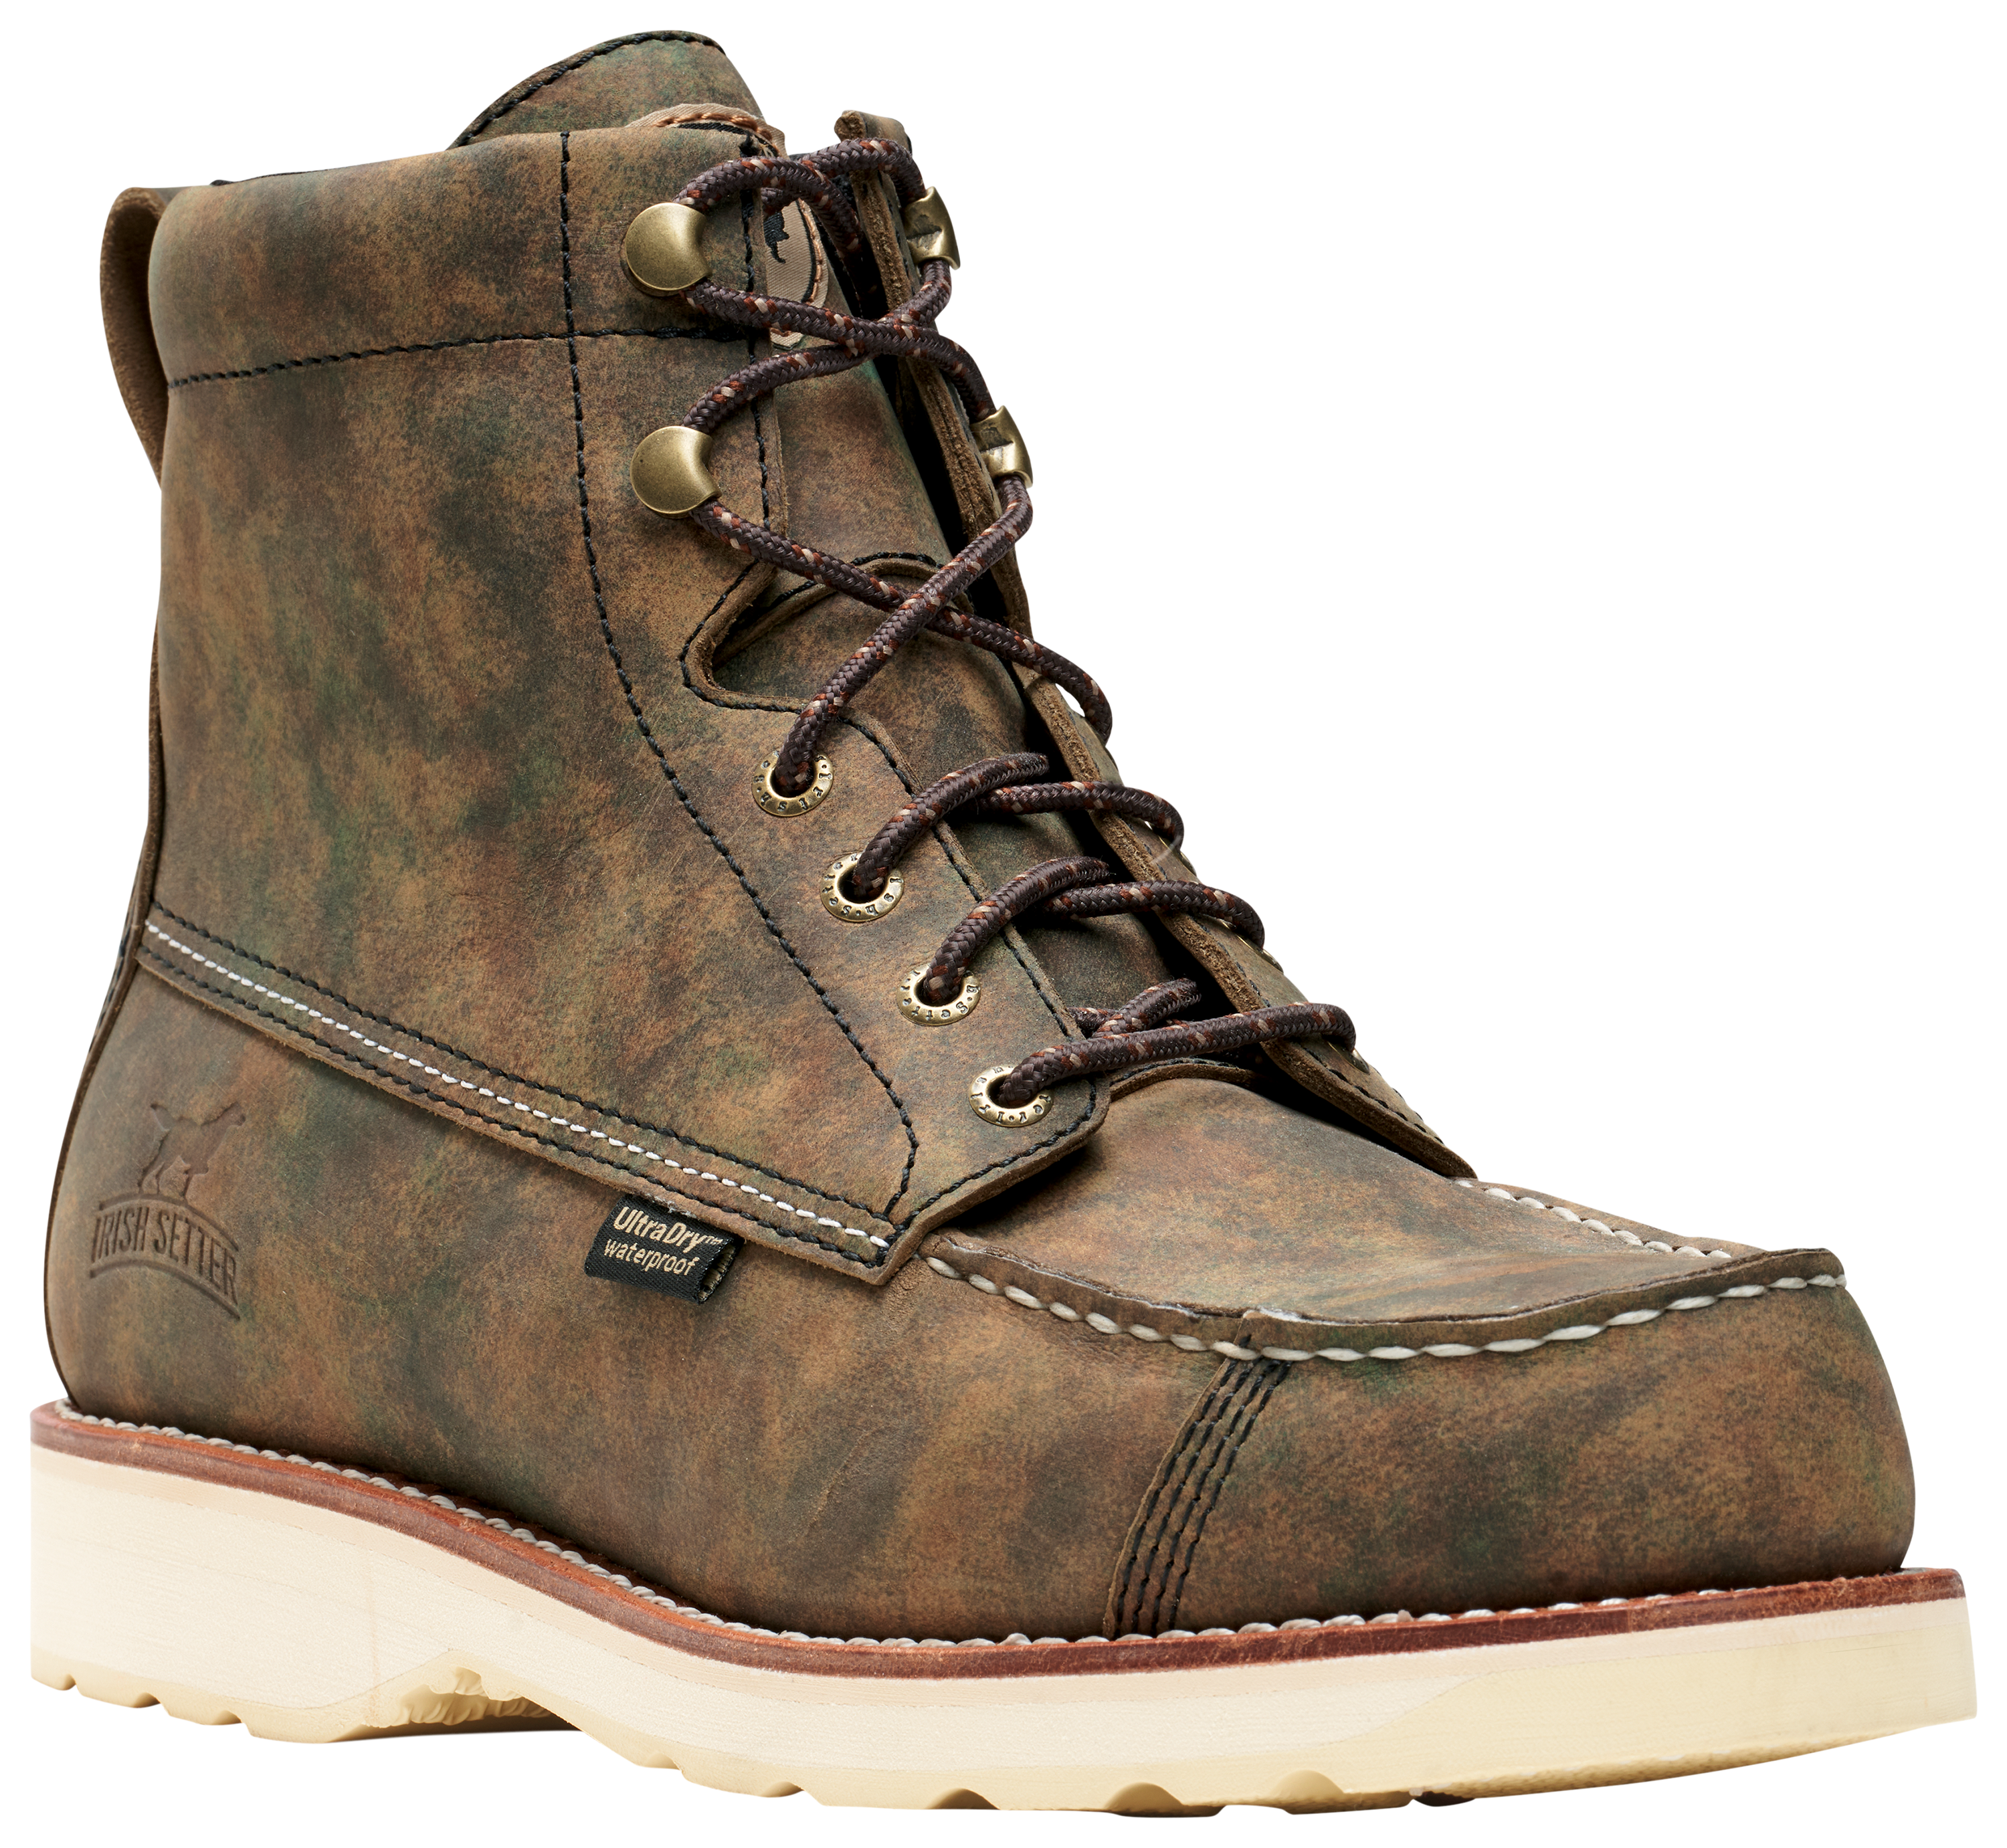 Irish Setter Wingshooter 7 Waterproof Hunting Boots for Men - Earth Camo - 9M